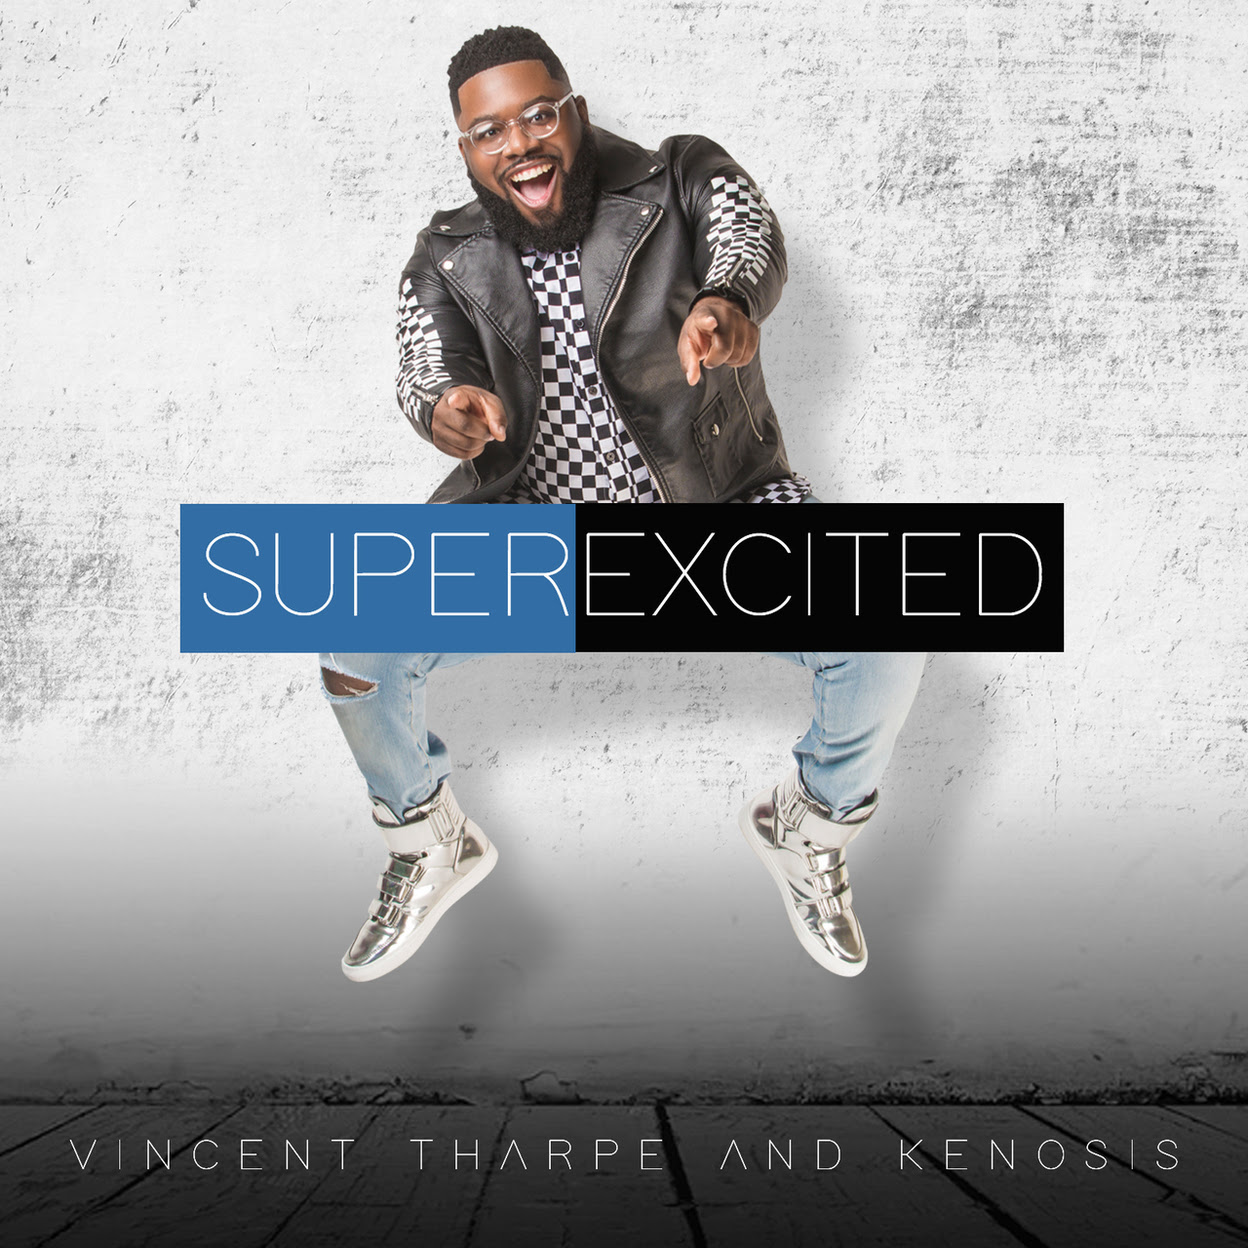 Vincent Tharpe and Kenosis - SUPER EXCITED Album